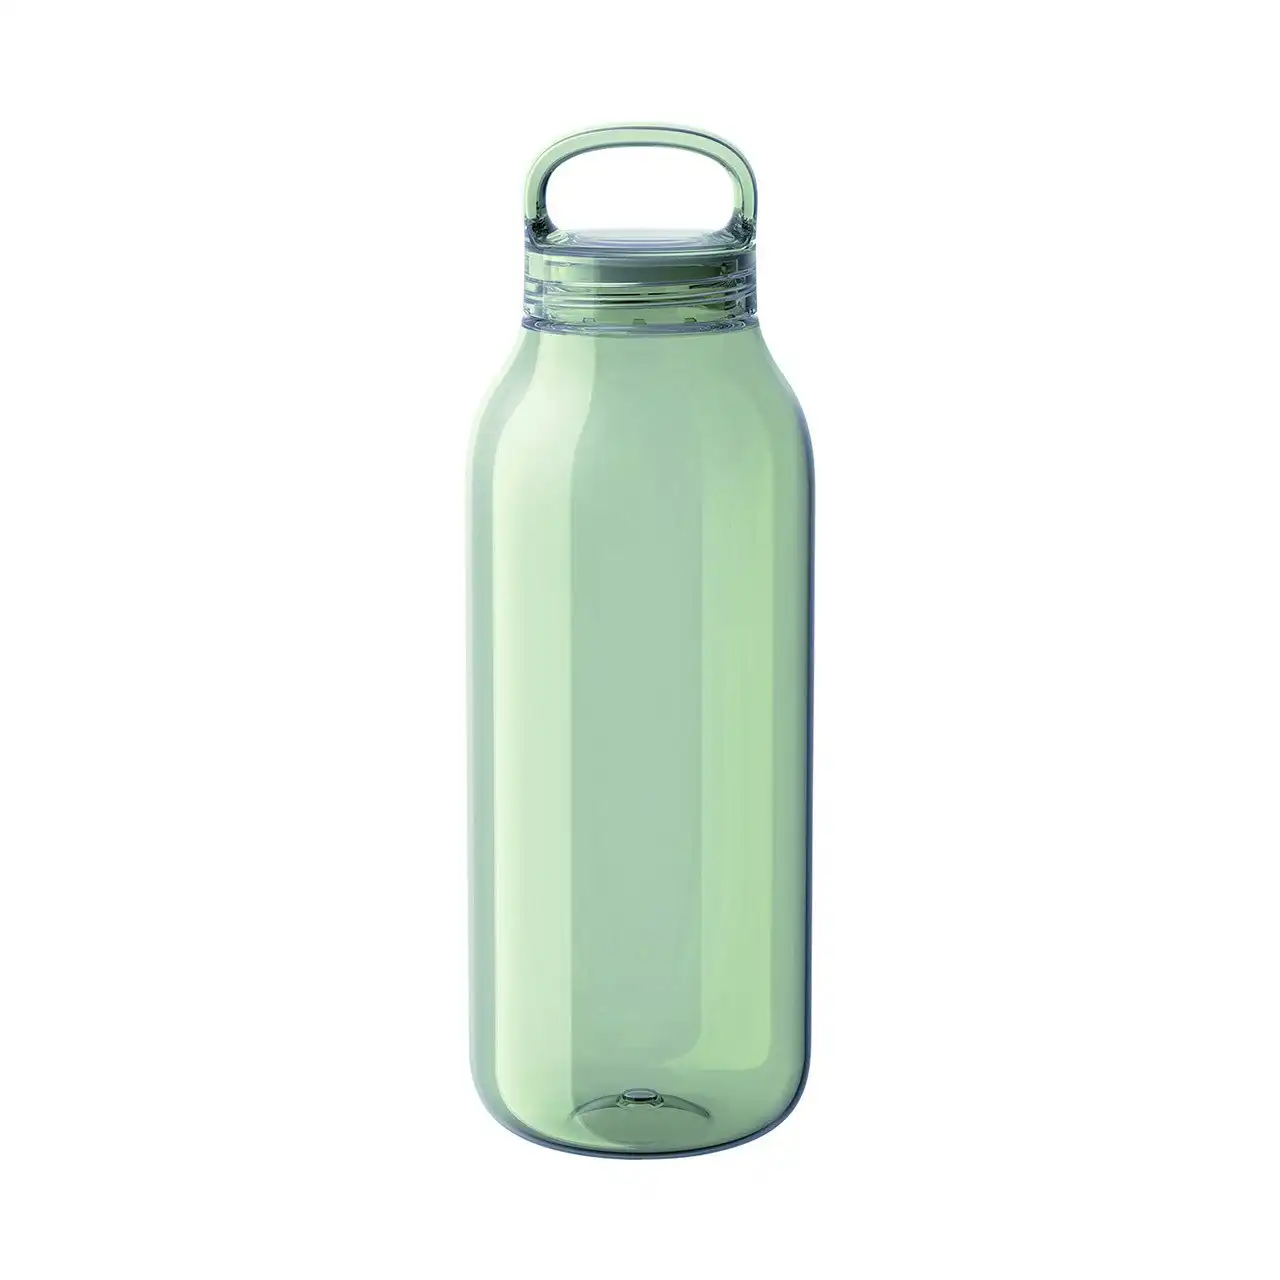 Kinto 950ml Water Bottle Travel Drinking Container w/ Twist Lid/Handle Green